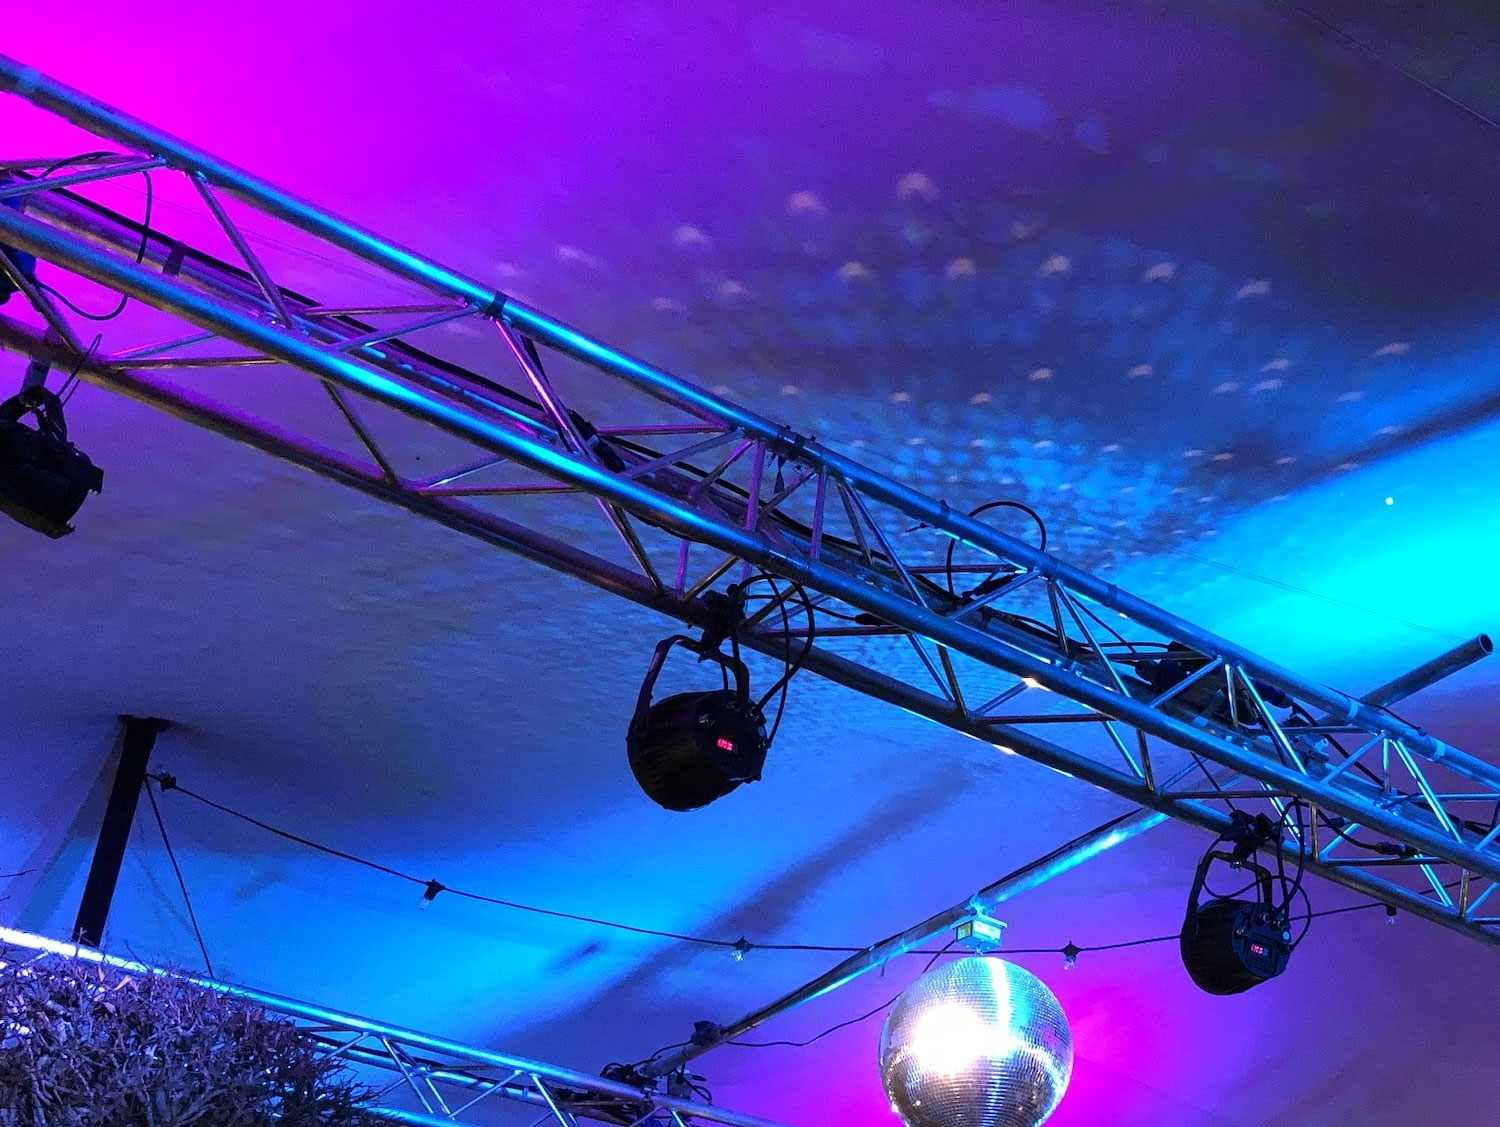 12” Truss Holding Stand System rent in srilanka